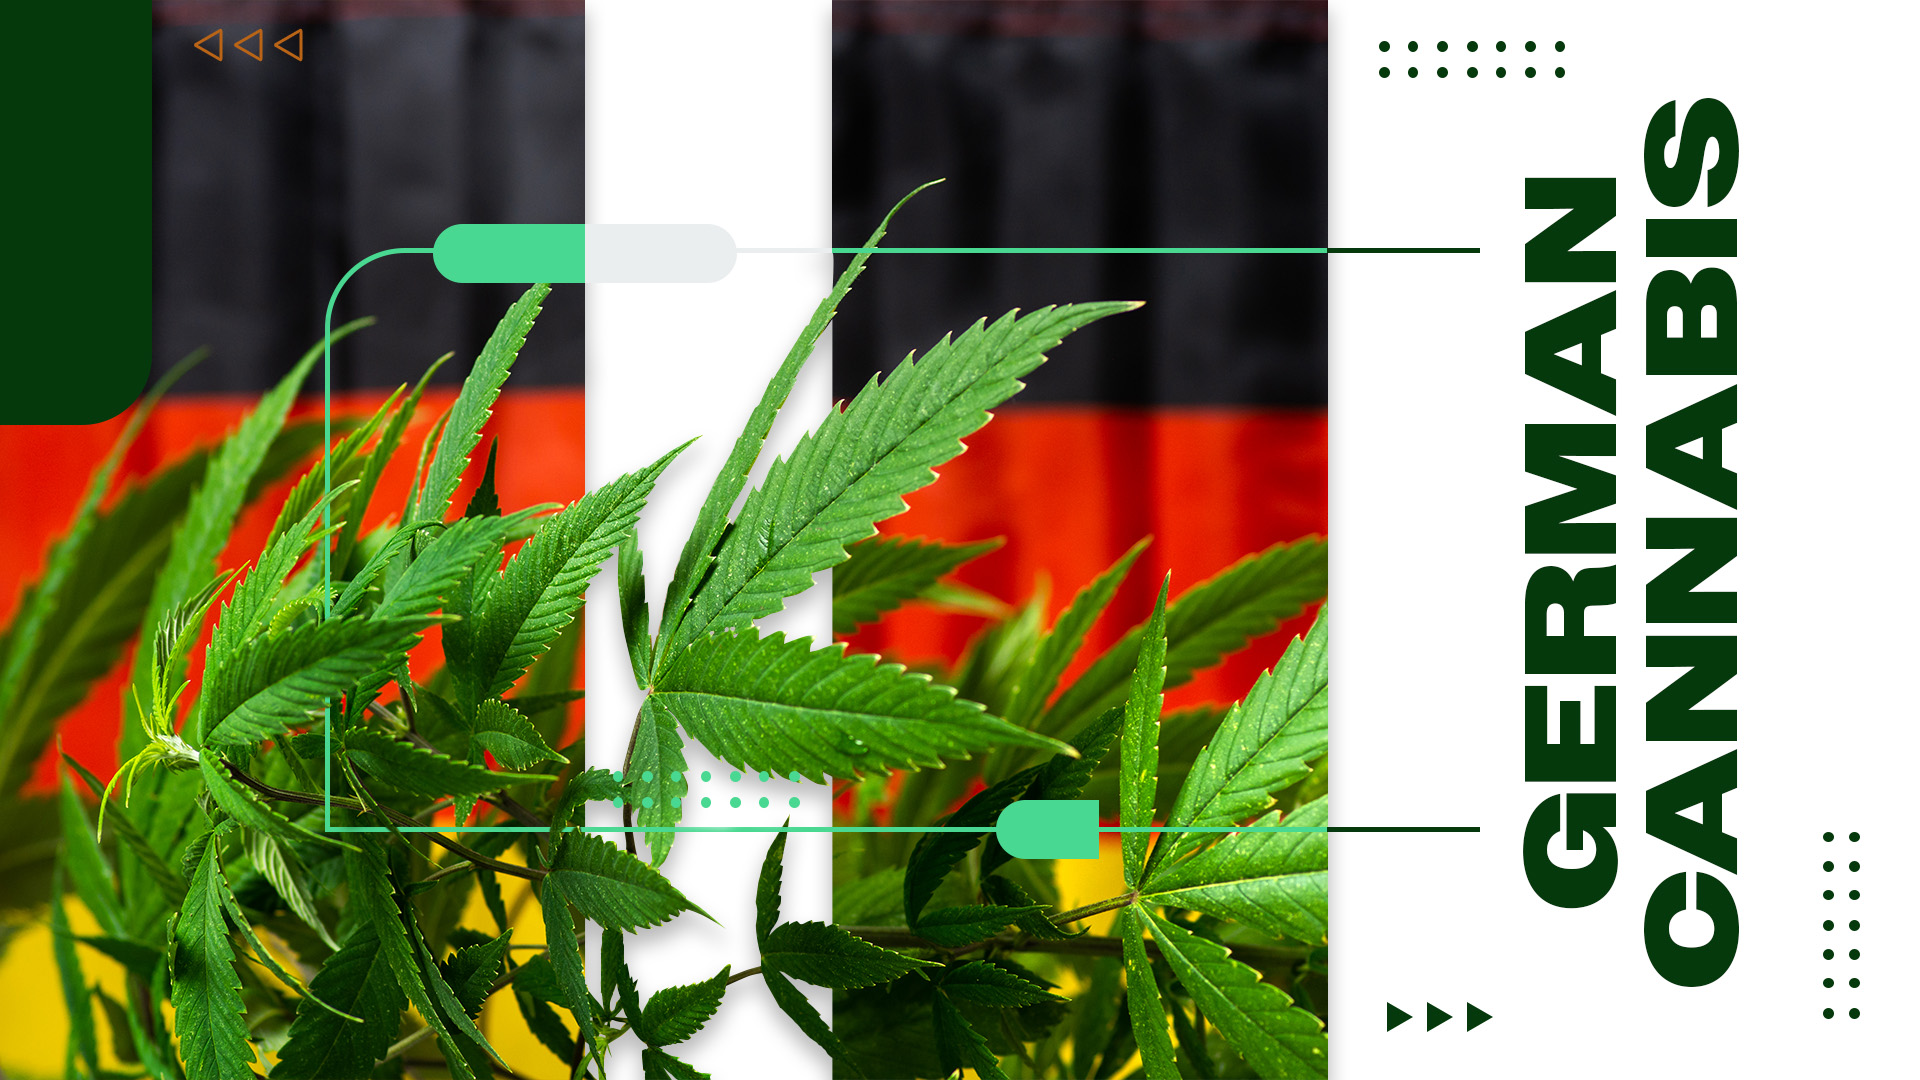 Is Weed Legal In Germany? Germany’s Recreational Cannabis Program Explained